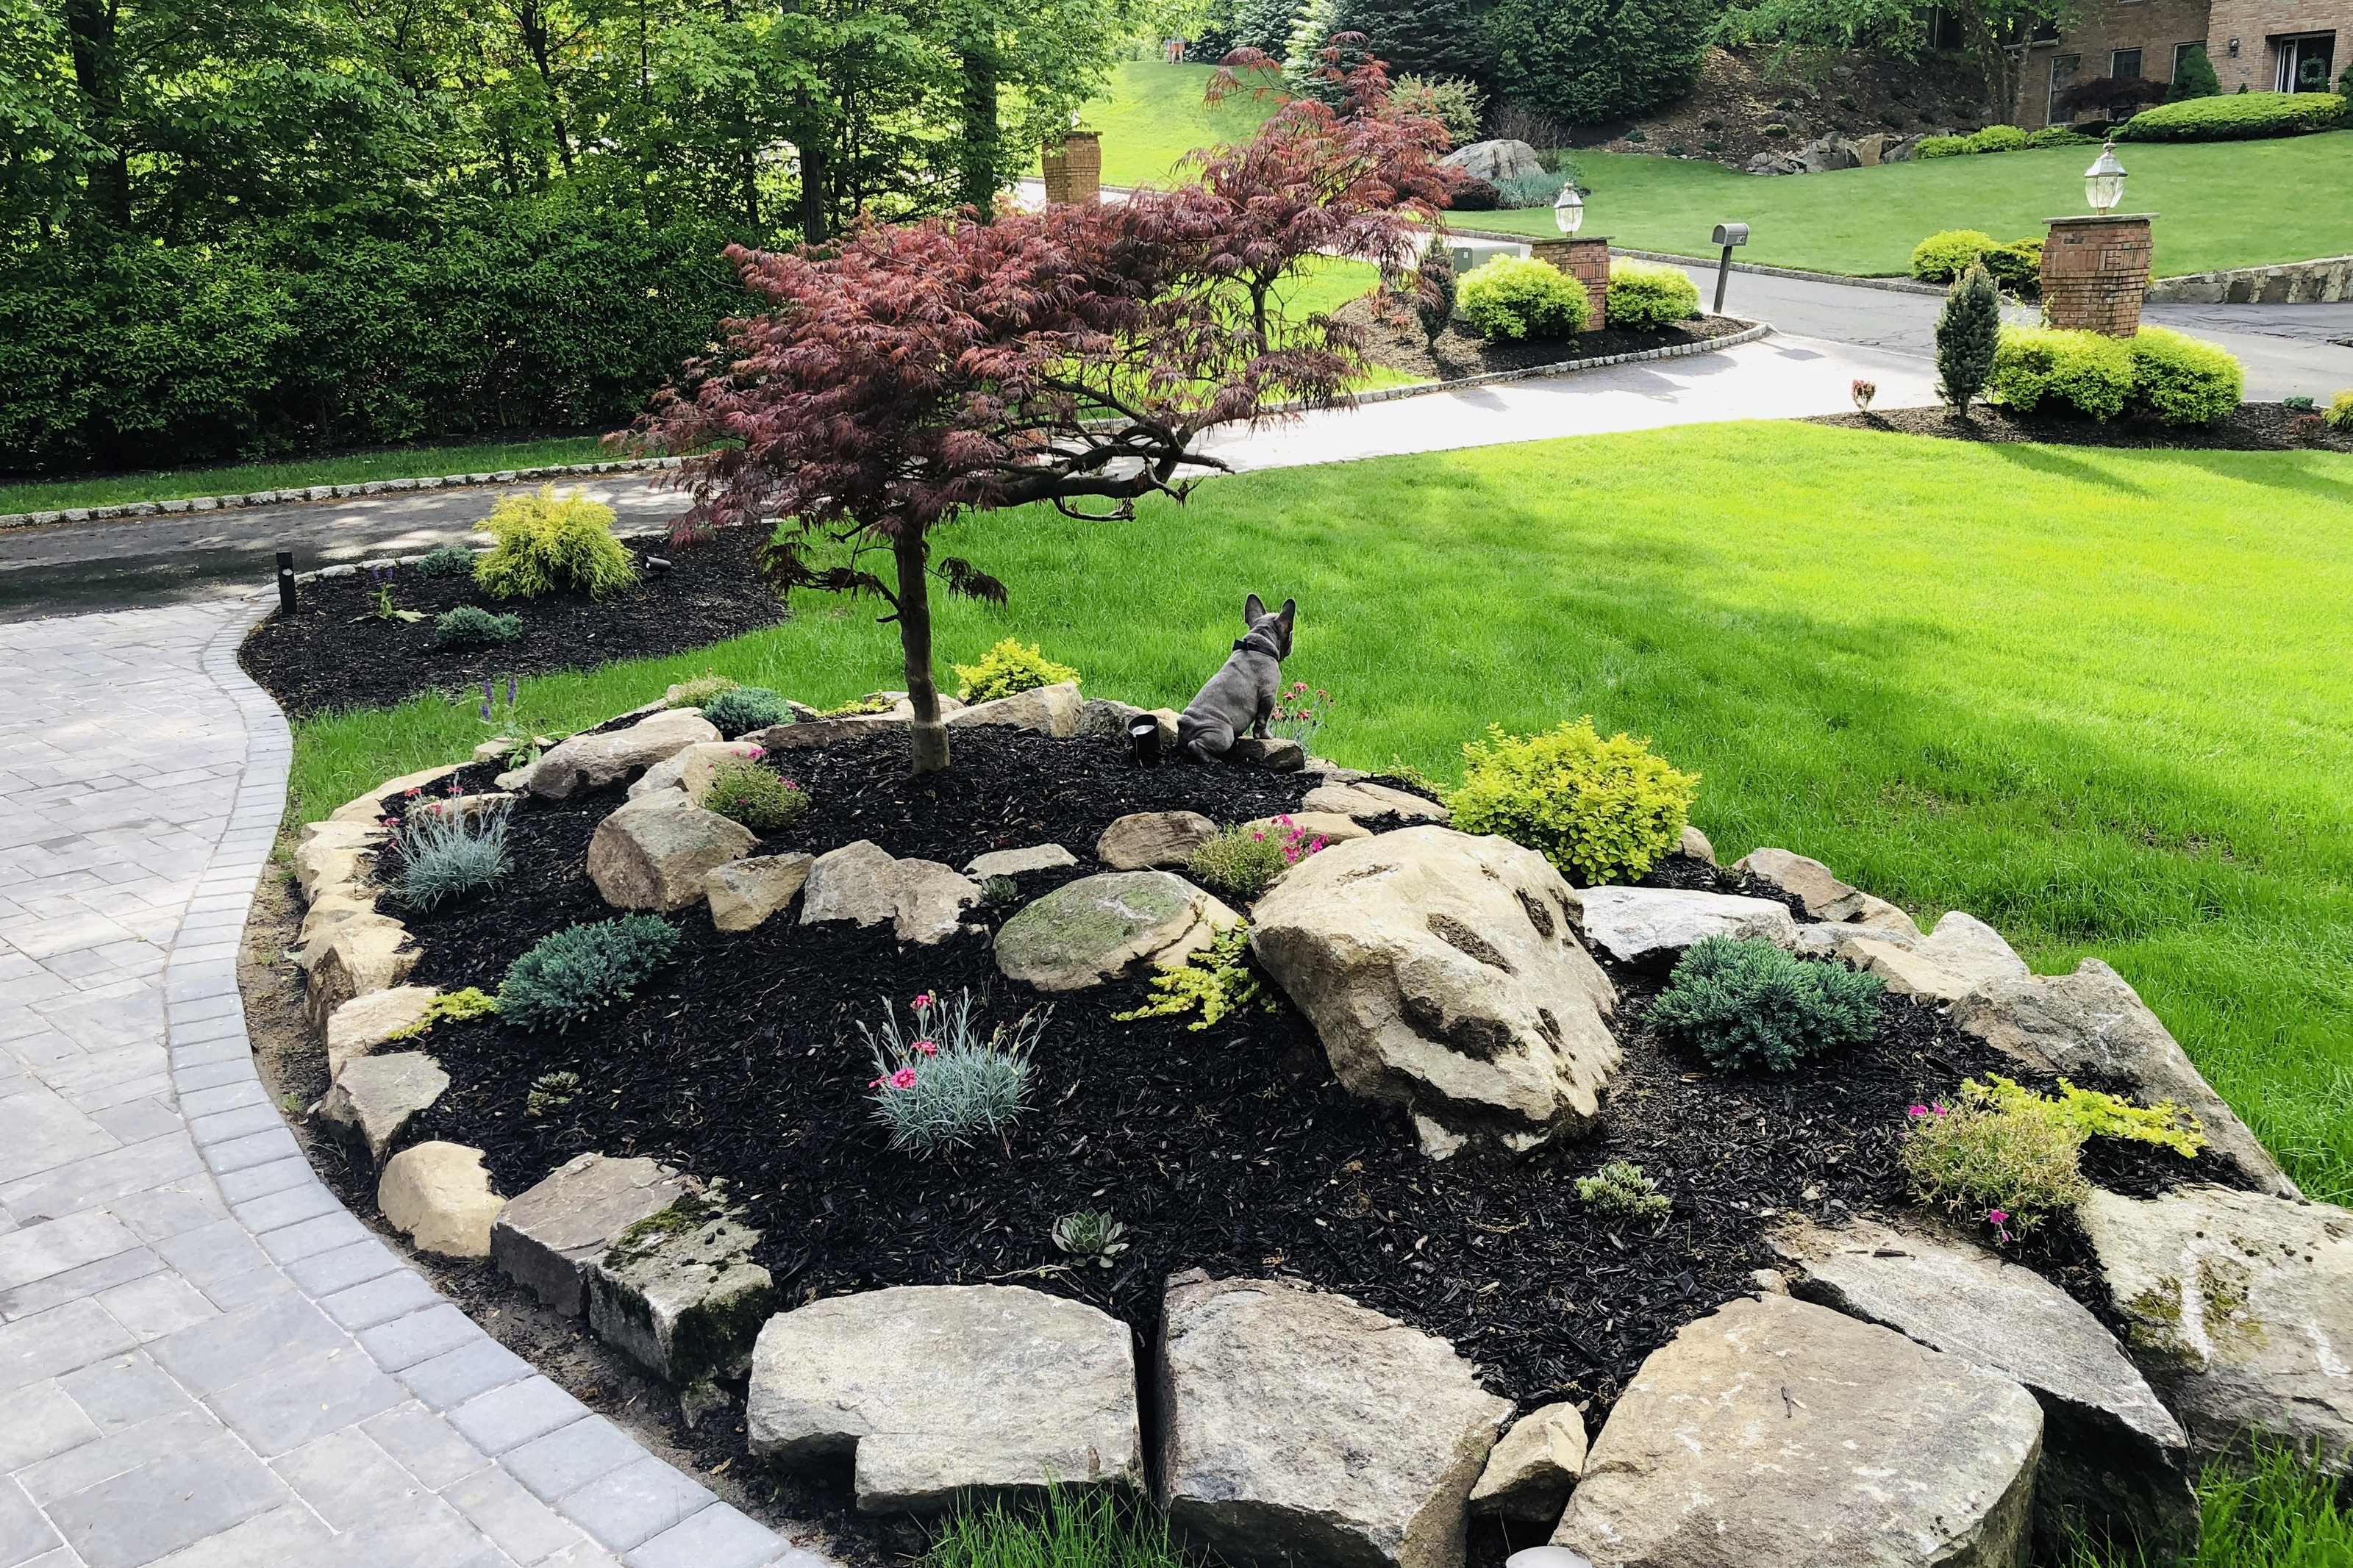 Landscaping work in lawn